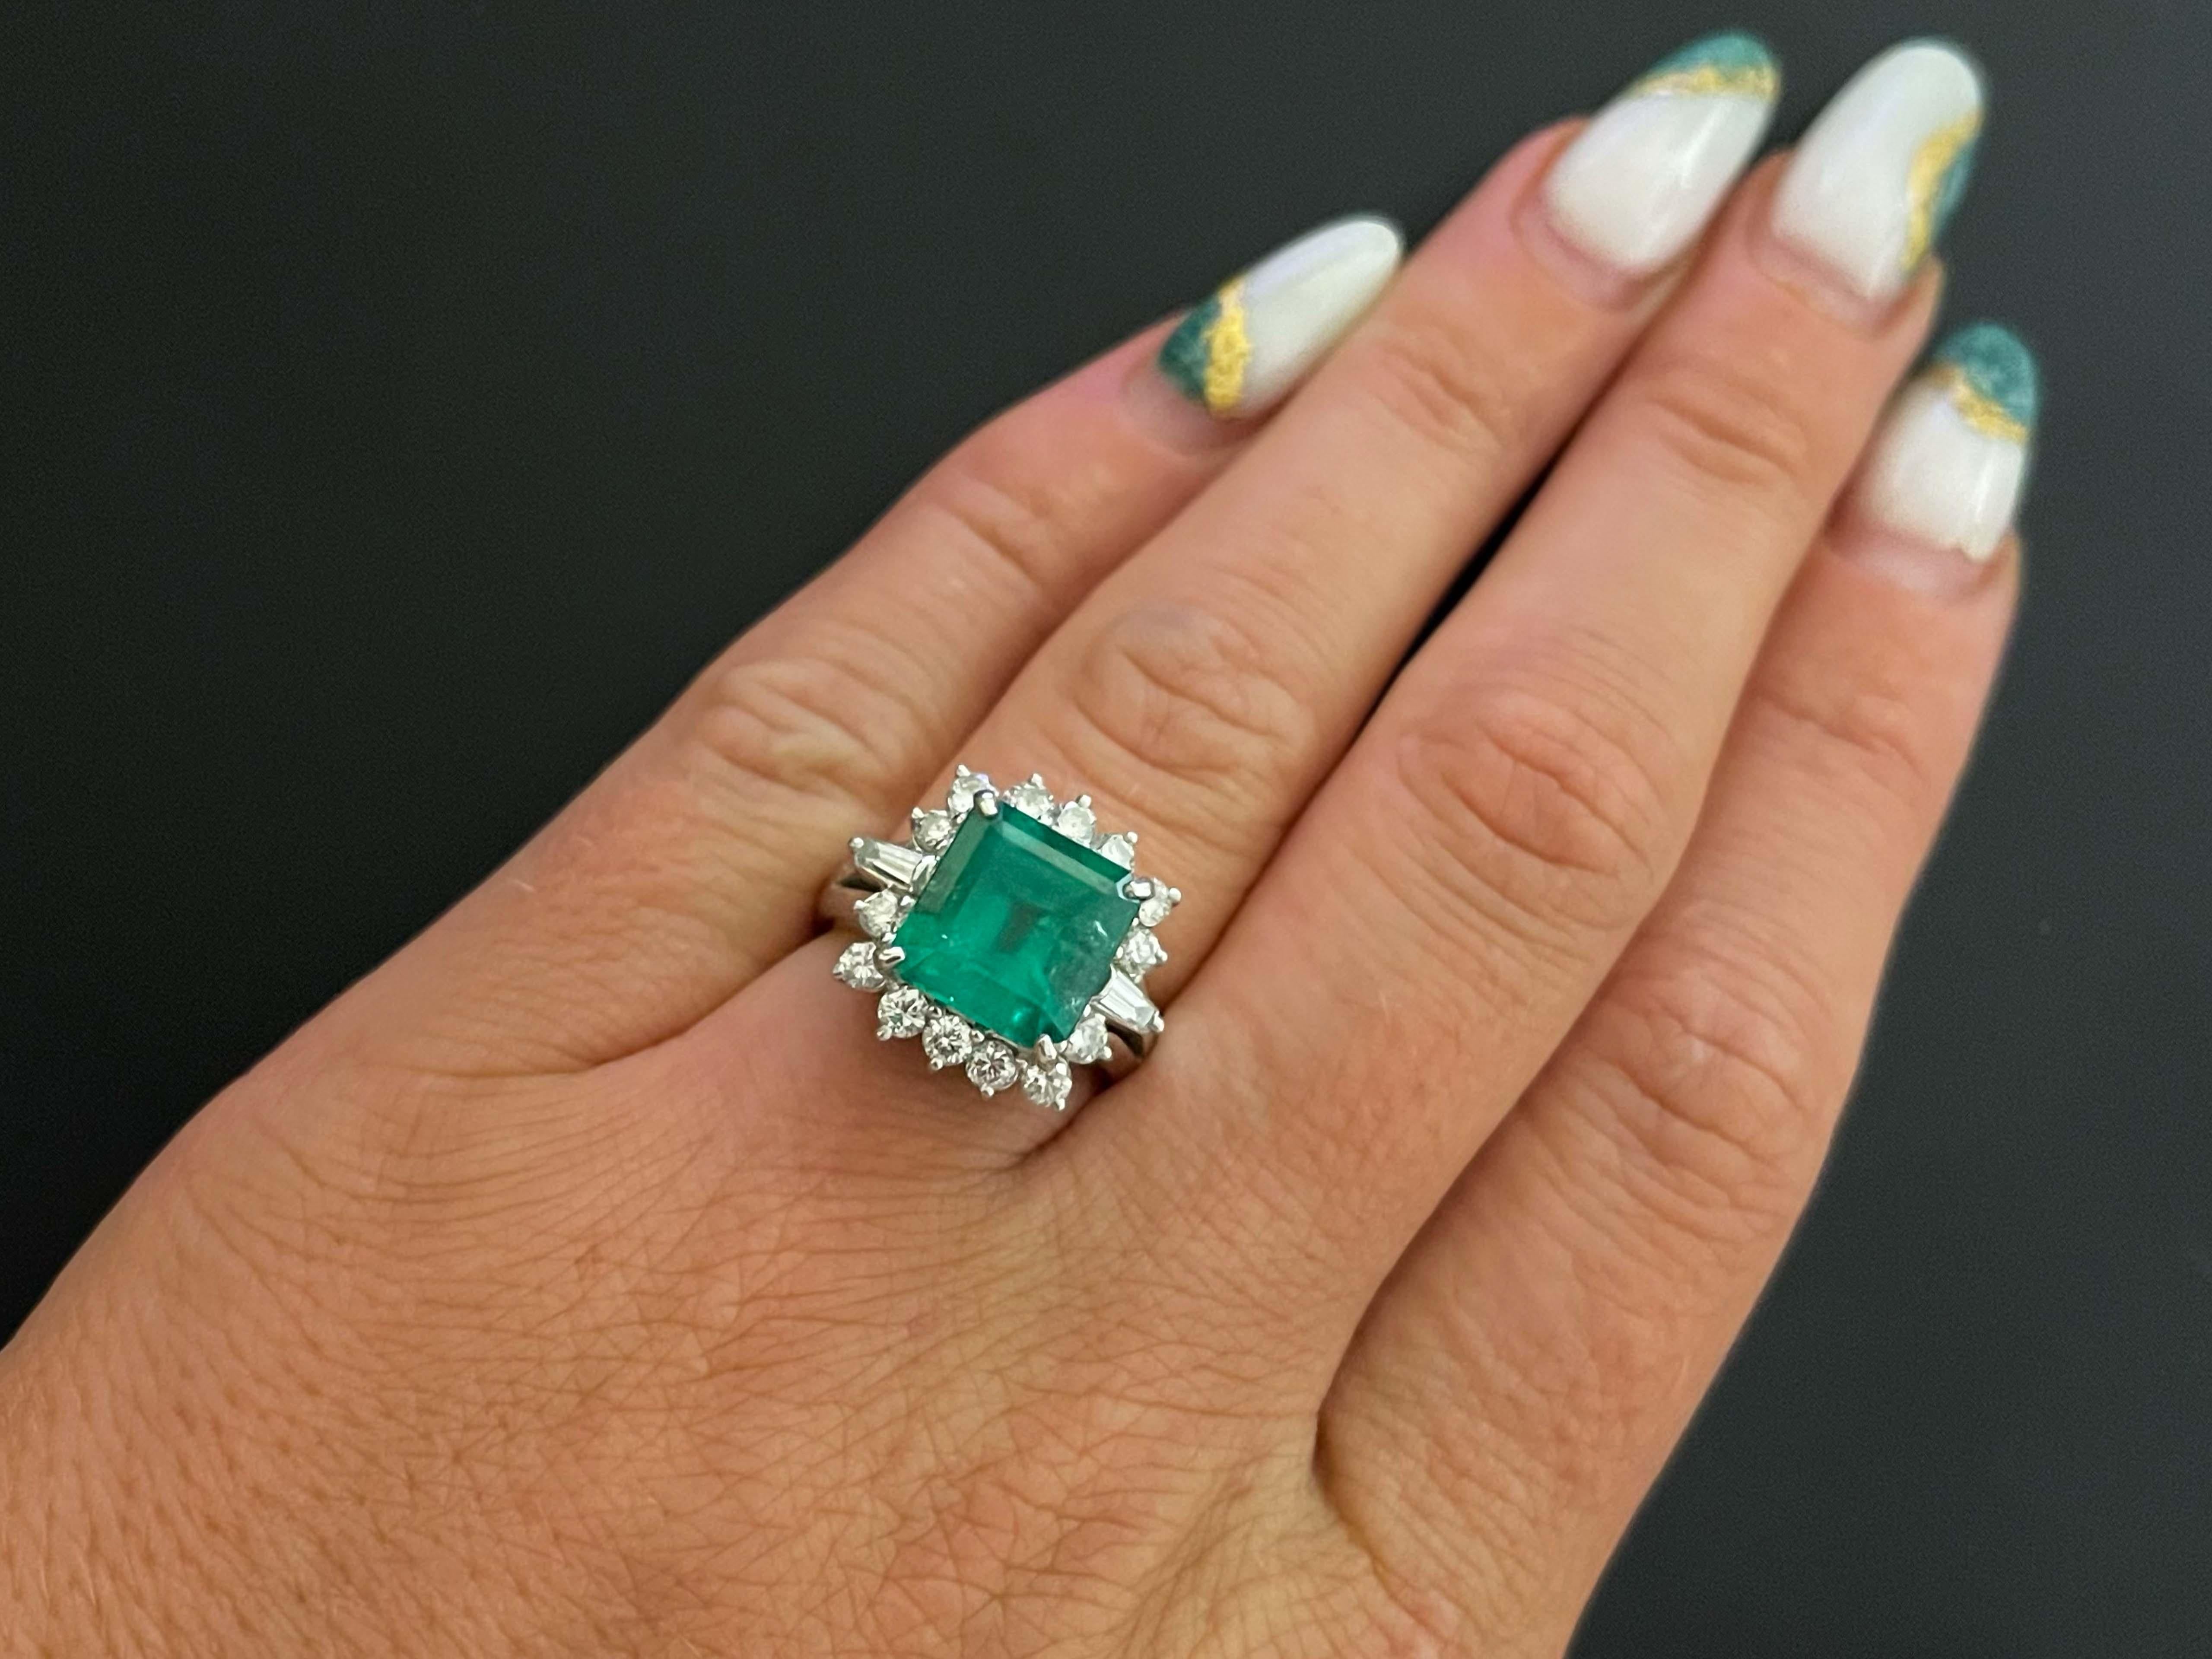 Rare 4.24 ct. Fine Colombian Emerald & Diamond Platinum Ring With GIA Report. This stunning ring features a 4.24 octagonal, step cut, semi-transparent Emerald, surrounded by a gorgeous 16 diamond halo. The Colombian Emerald is accompanied by a GIA